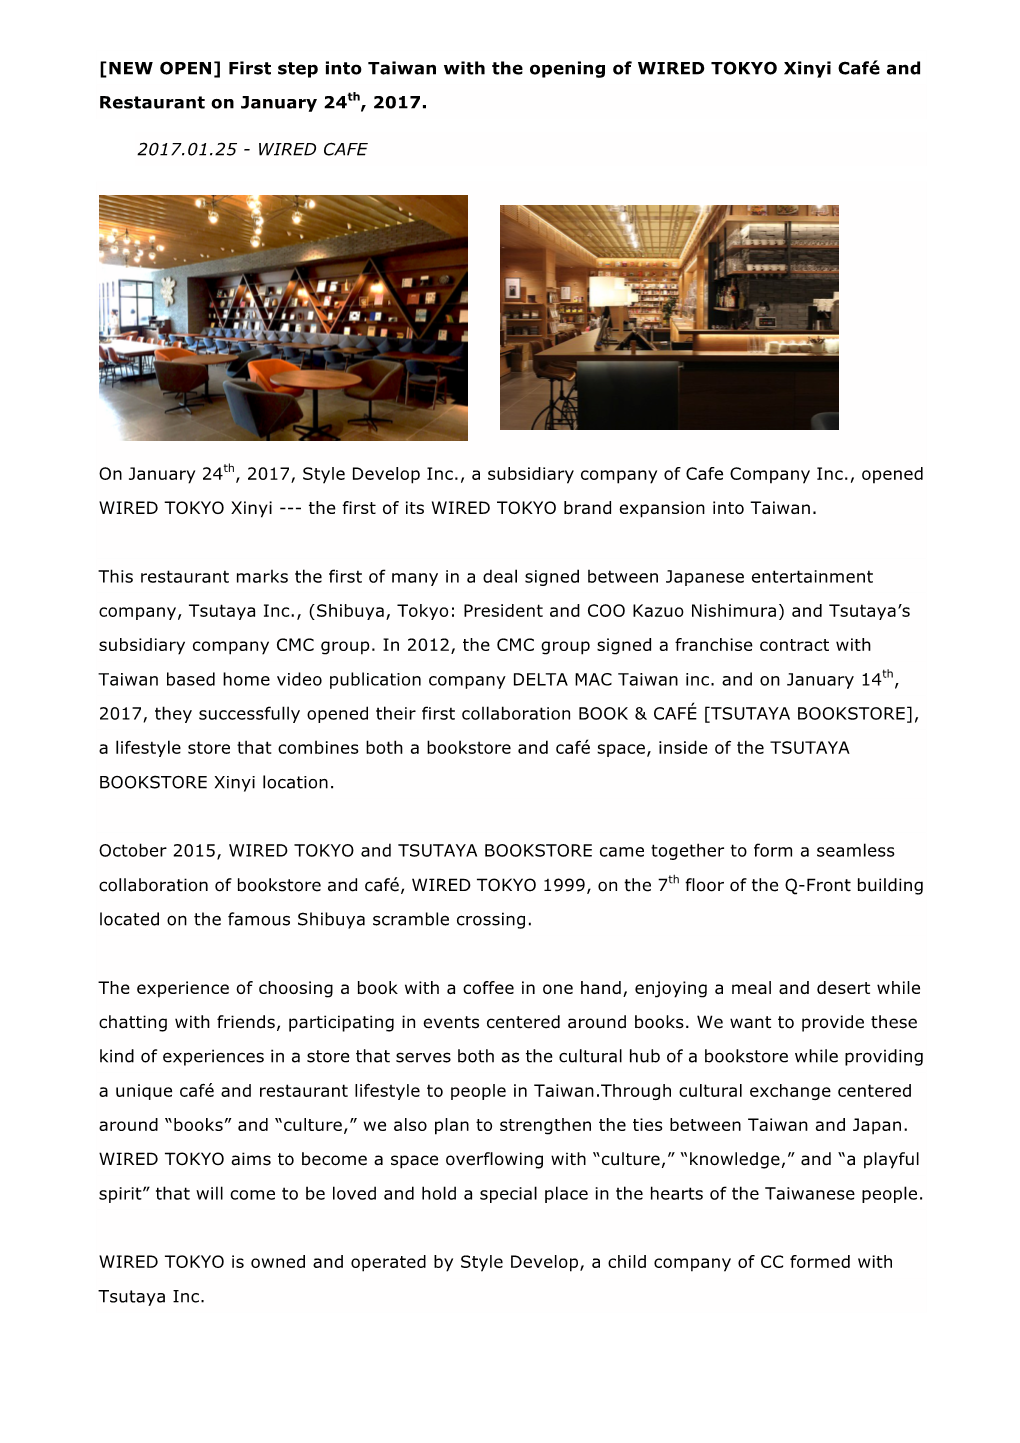 First Step Into Taiwan with the Opening of WIRED TOKYO Xinyi Café And